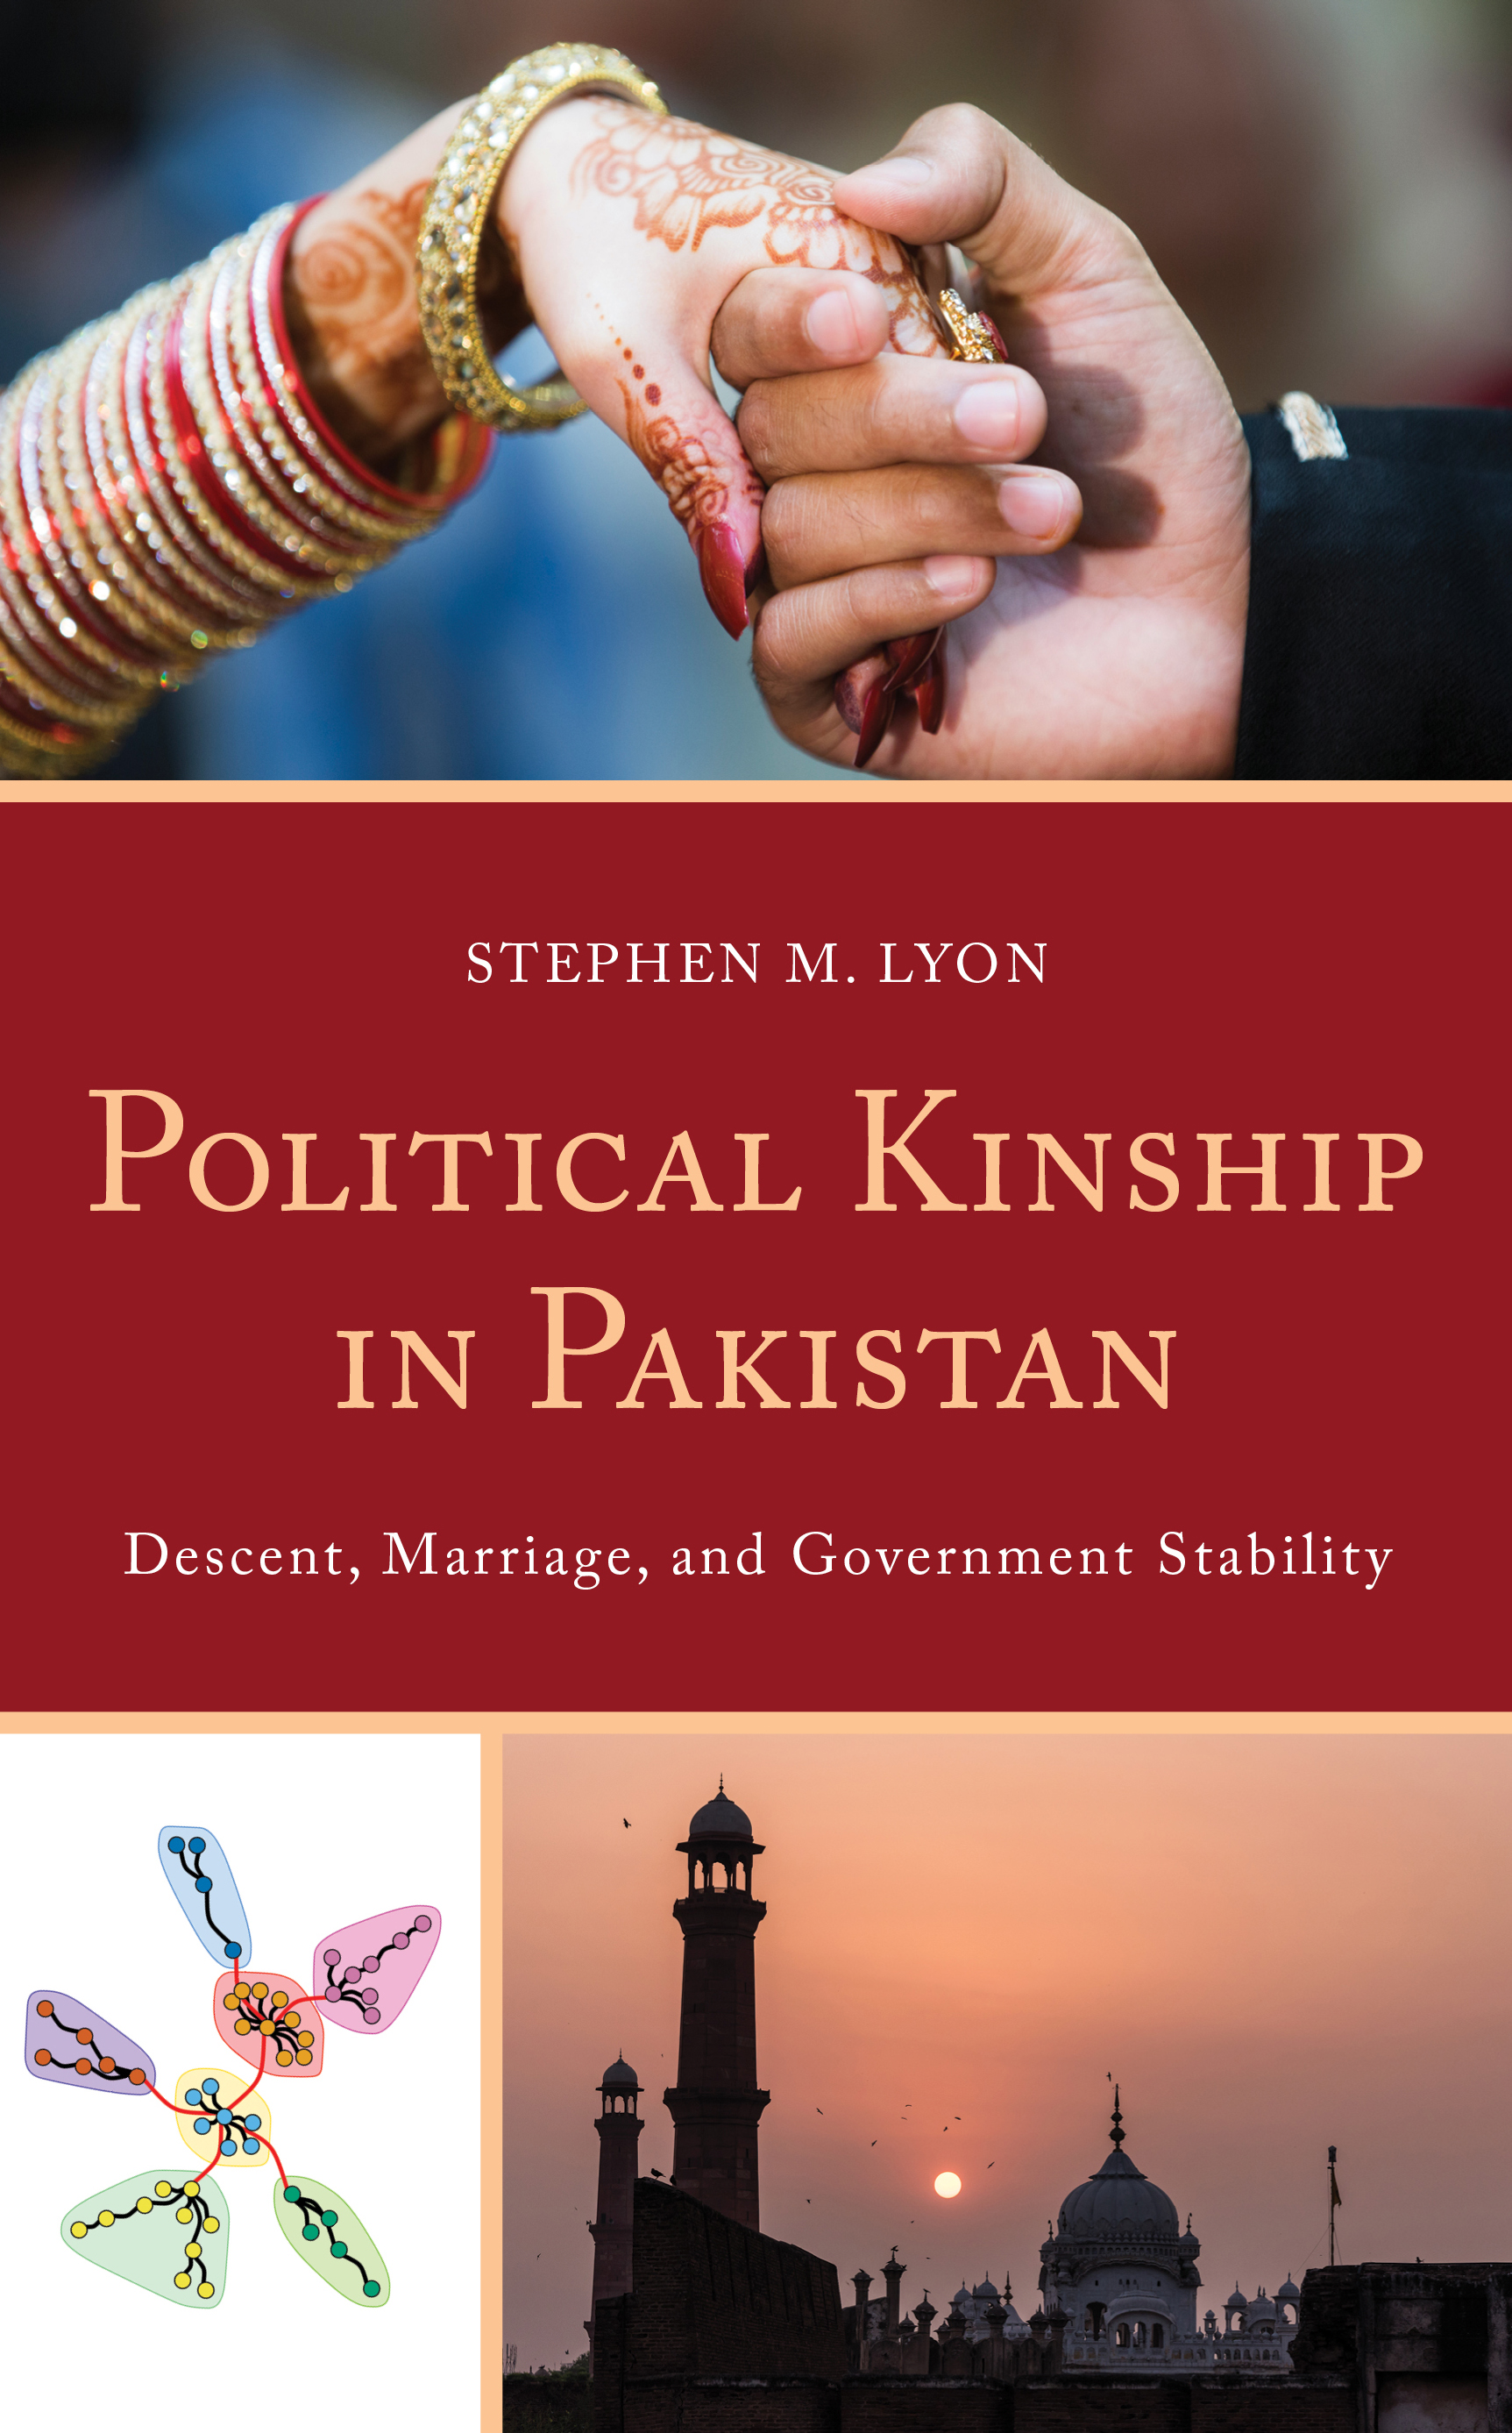 Political Kinship in Pakistan: Descent, Marriage, and Government Stability